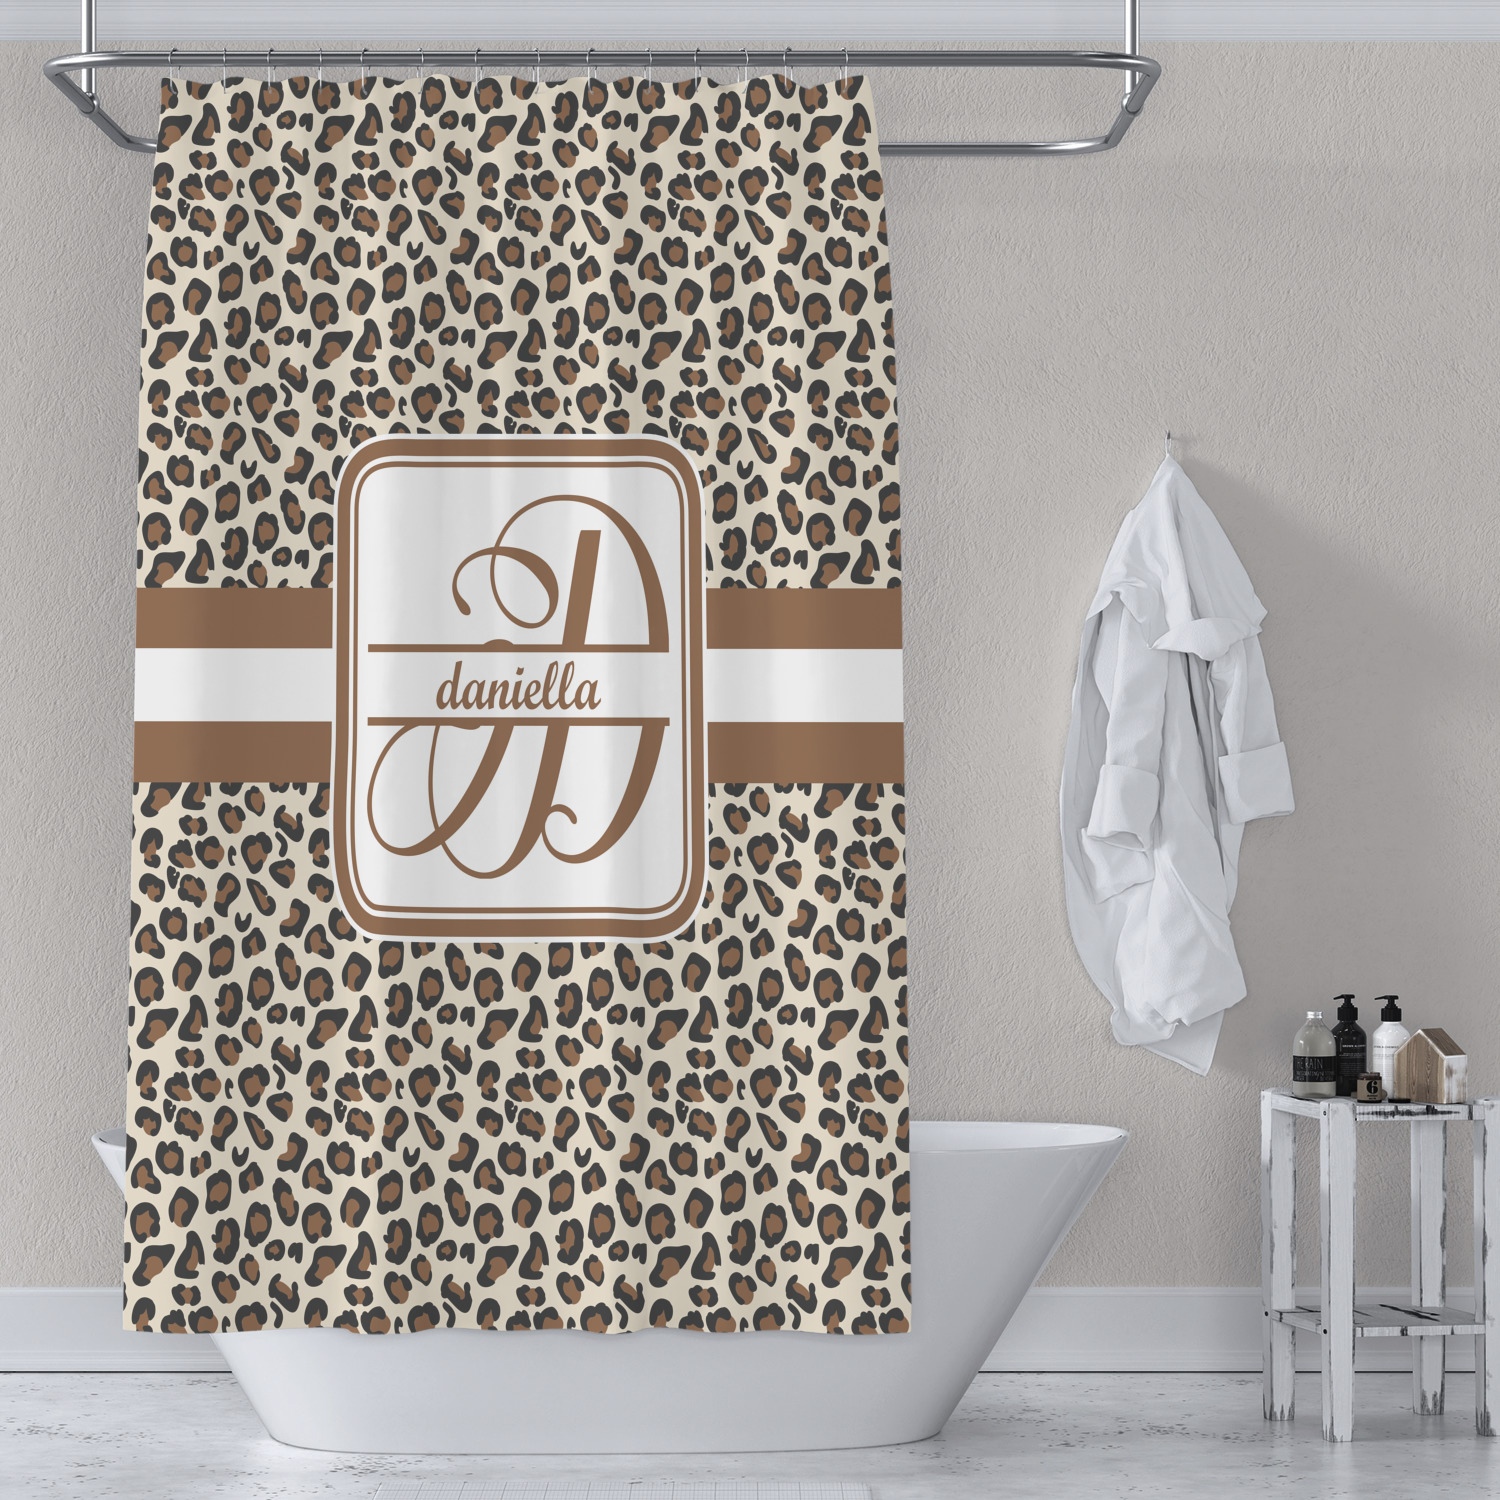 Leopard Print Shower Curtain Personalized YouCustomizeIt